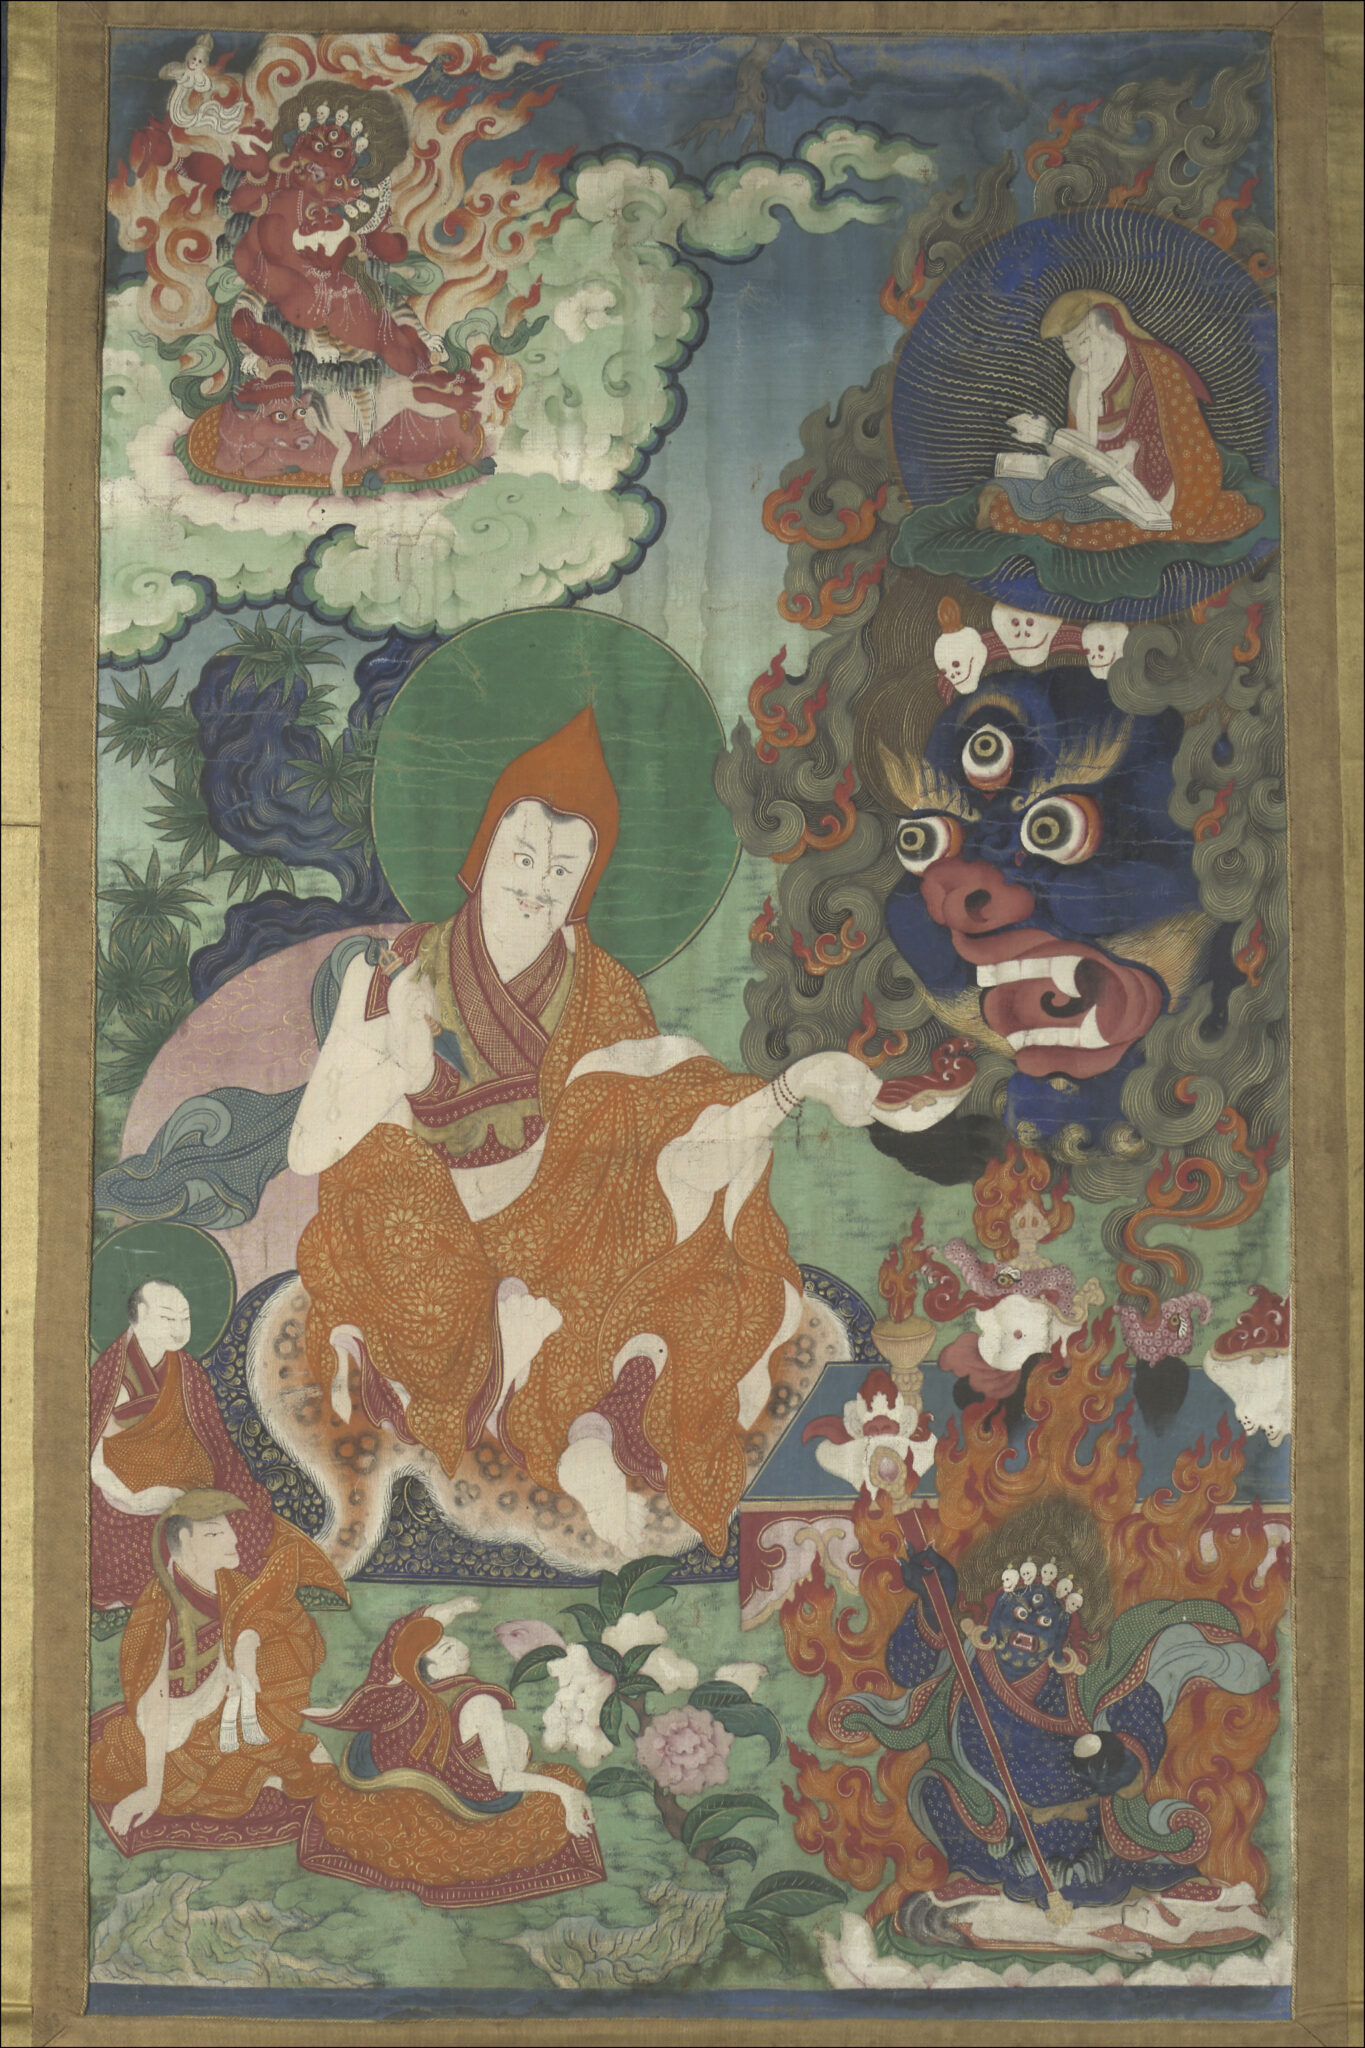 Disciple in tremulous saffron robe inclines head and extends right hand towards monstrous deity at right